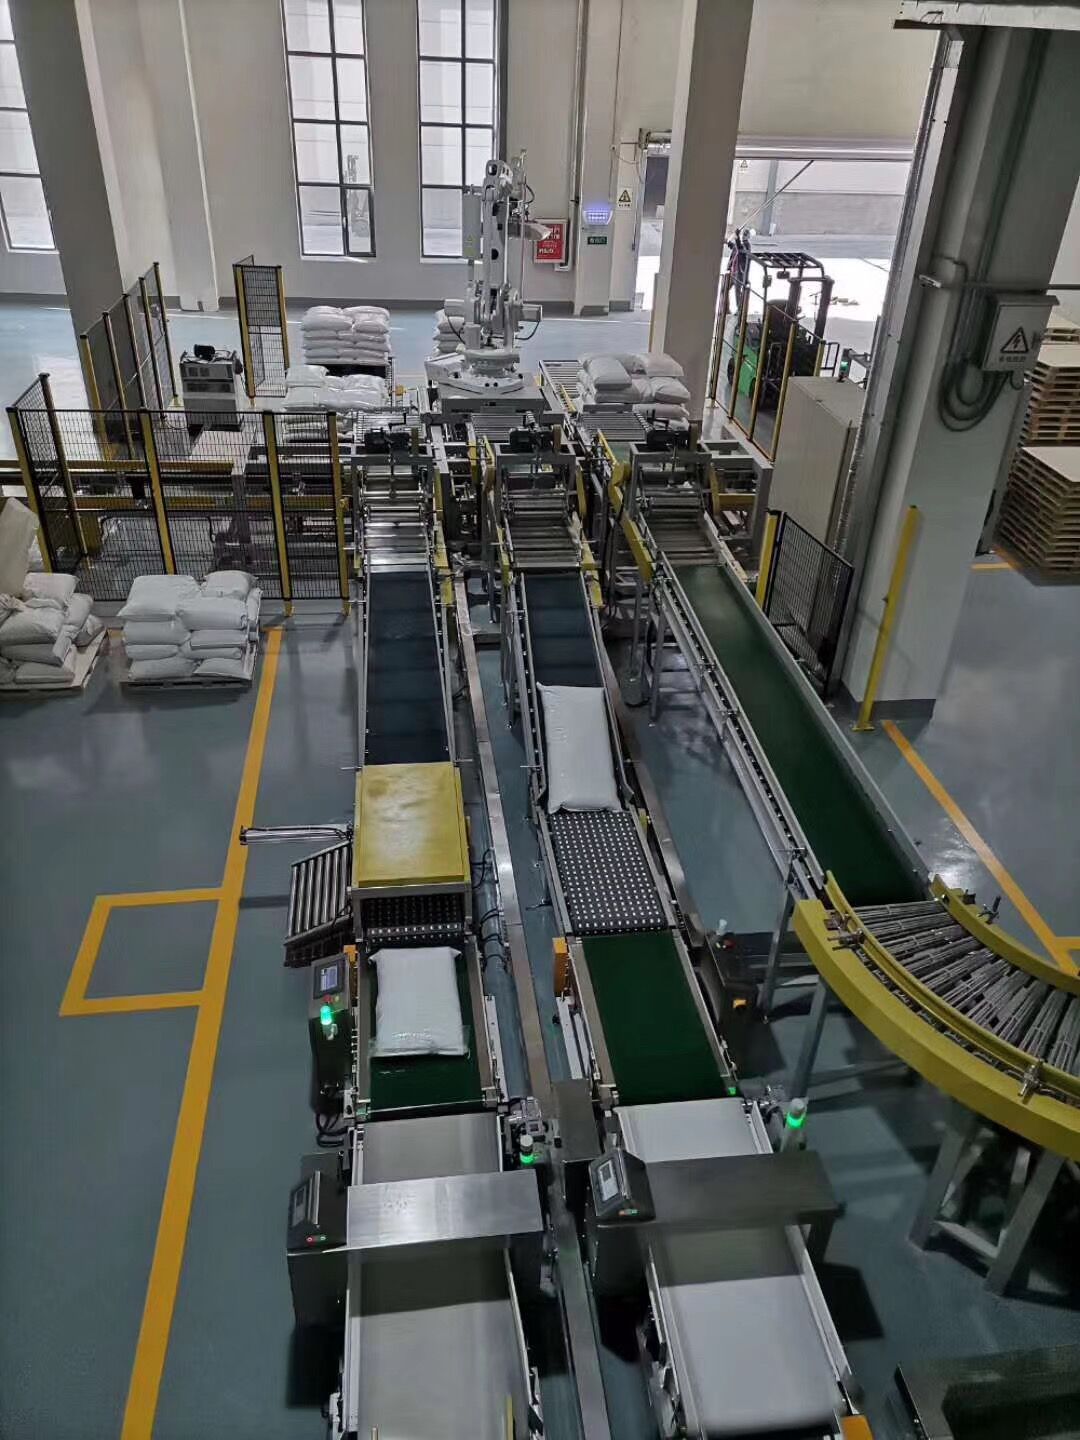 sand bagging equipment robotic palletising line Pellets Bagging Machine a complete set of stitching line Bag Scales & Fillers Mill Equipment Hemp Extractors packing line Chemical Plants packaging mach